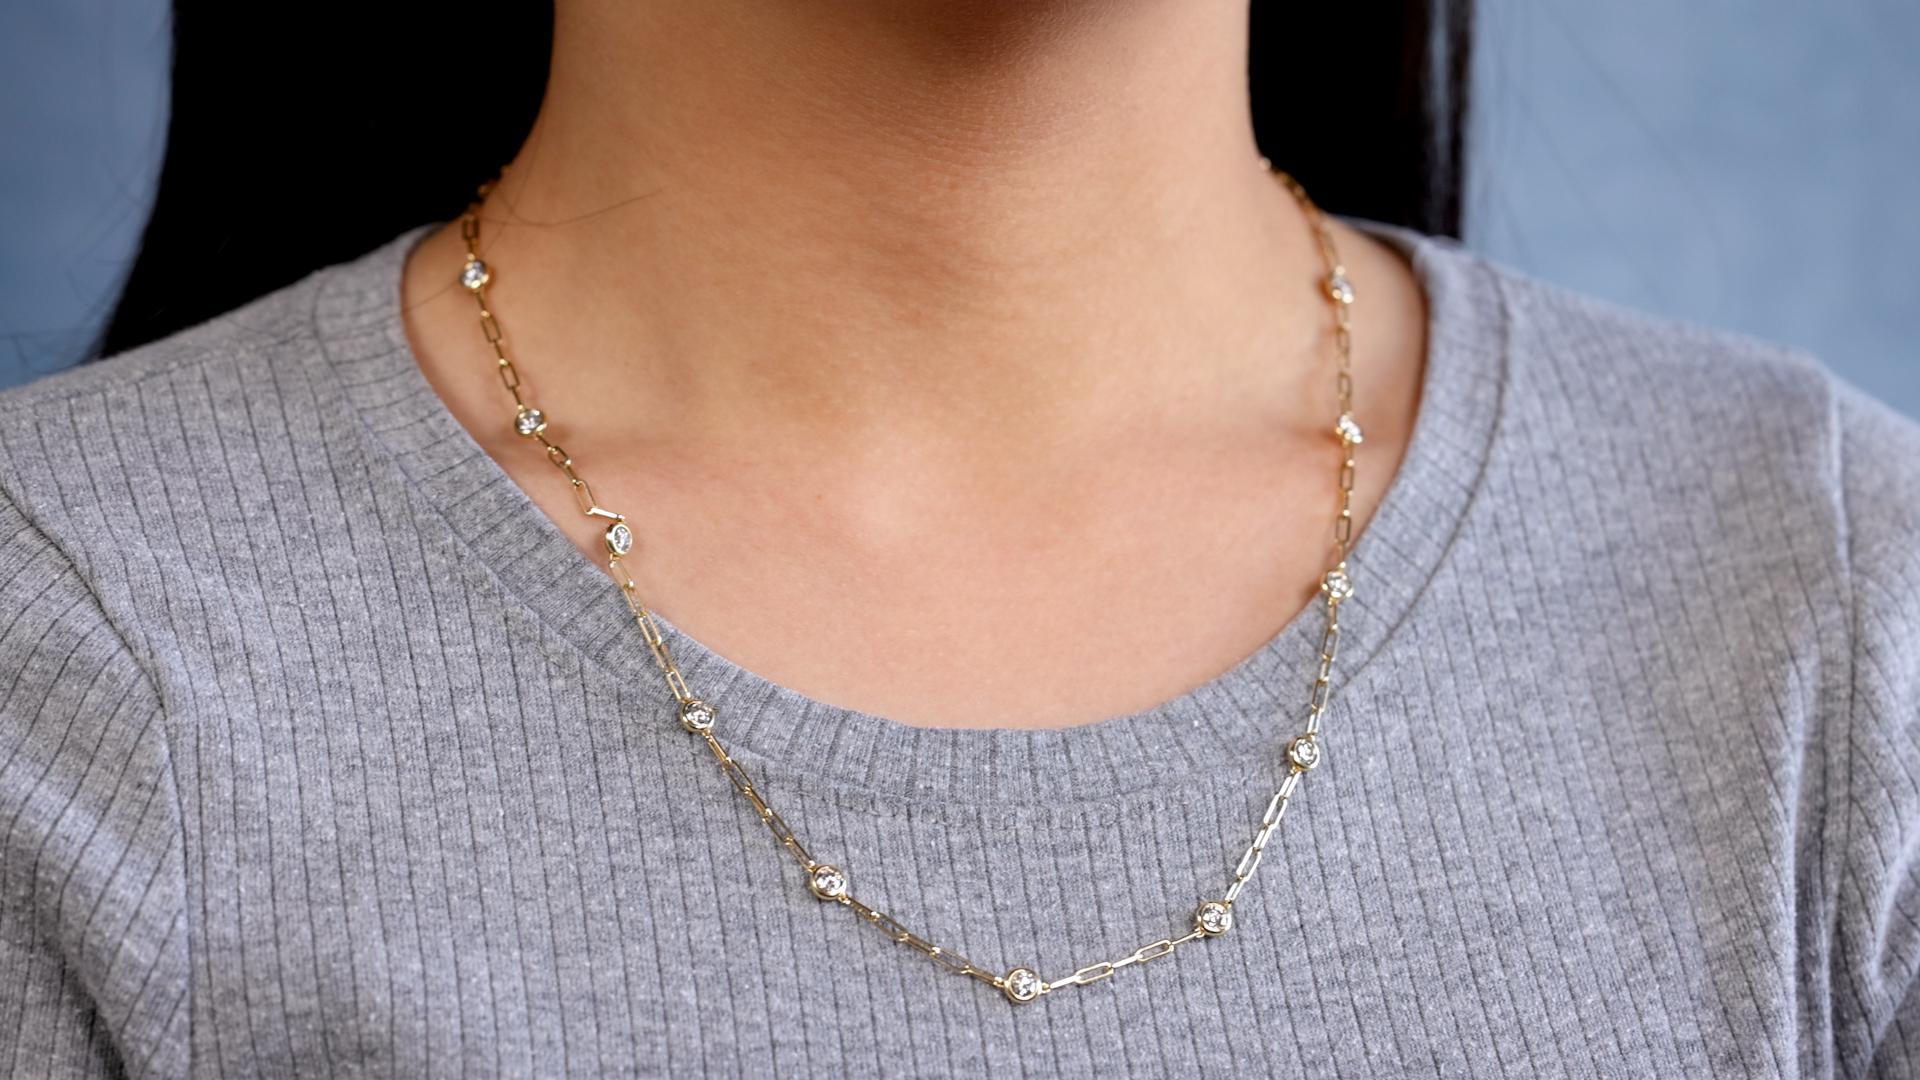 One 14k Yellow Gold Diamonds By The Yard Paperclip Necklace. Featuring 11 round brilliant cut diamonds with a total weight of 2.00 carats, graded H-I color, SI clarity. Crafted in 14 karat yellow gold with purity mark and maker’s mark. Circa 2023.